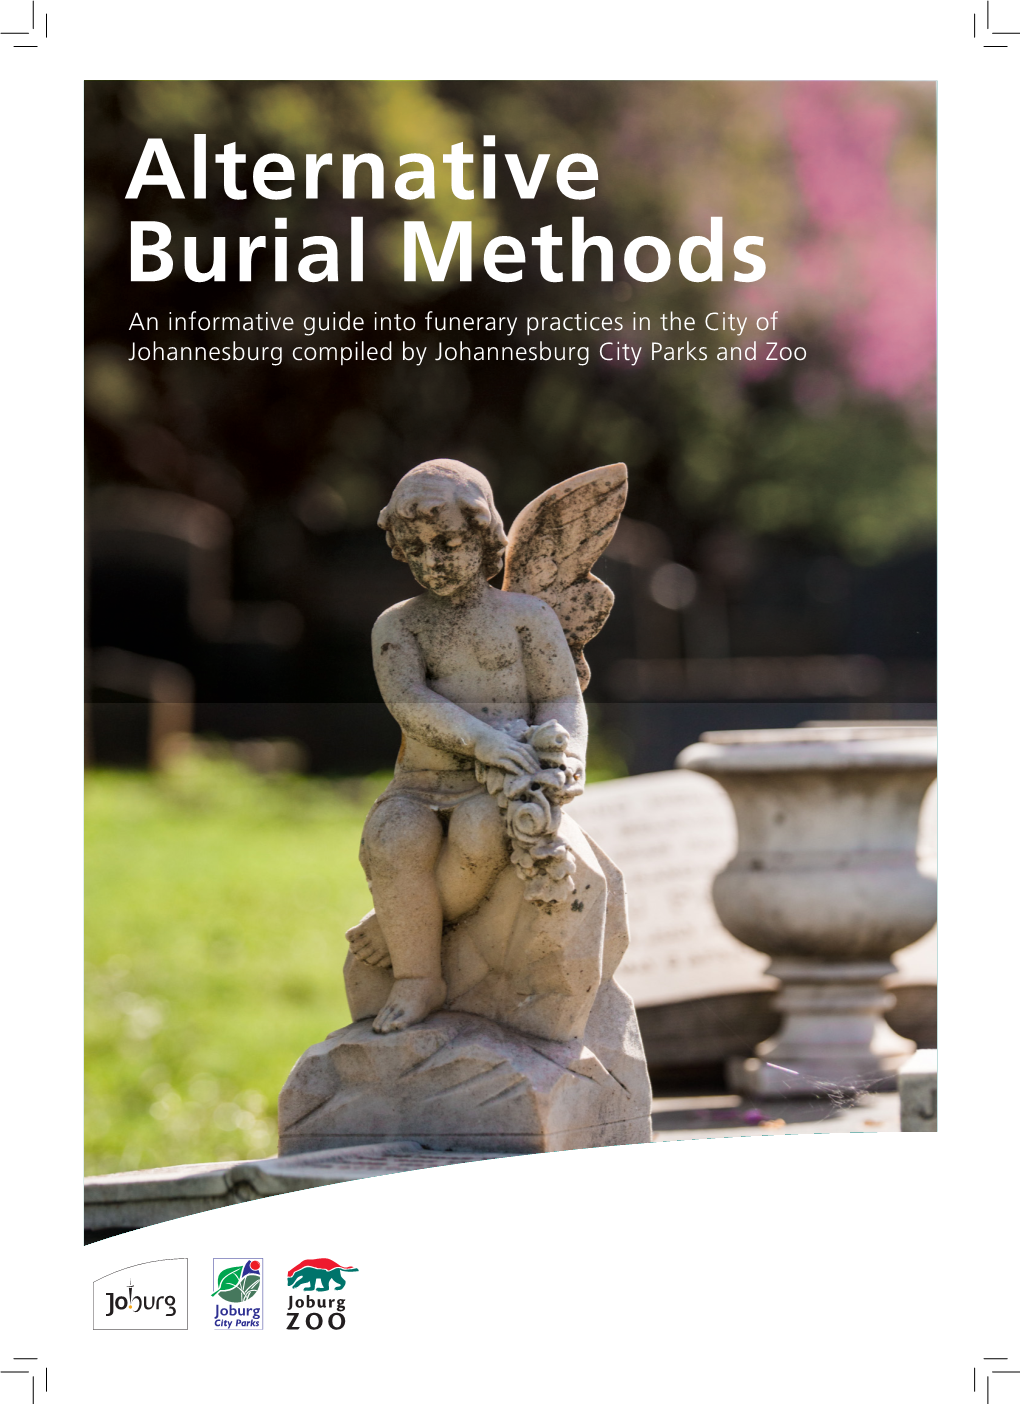 Alternative Burial Methods an Informative Guide Into Funerary Practices in the City of Johannesburg Compiled by Johannesburg City Parks and Zoo